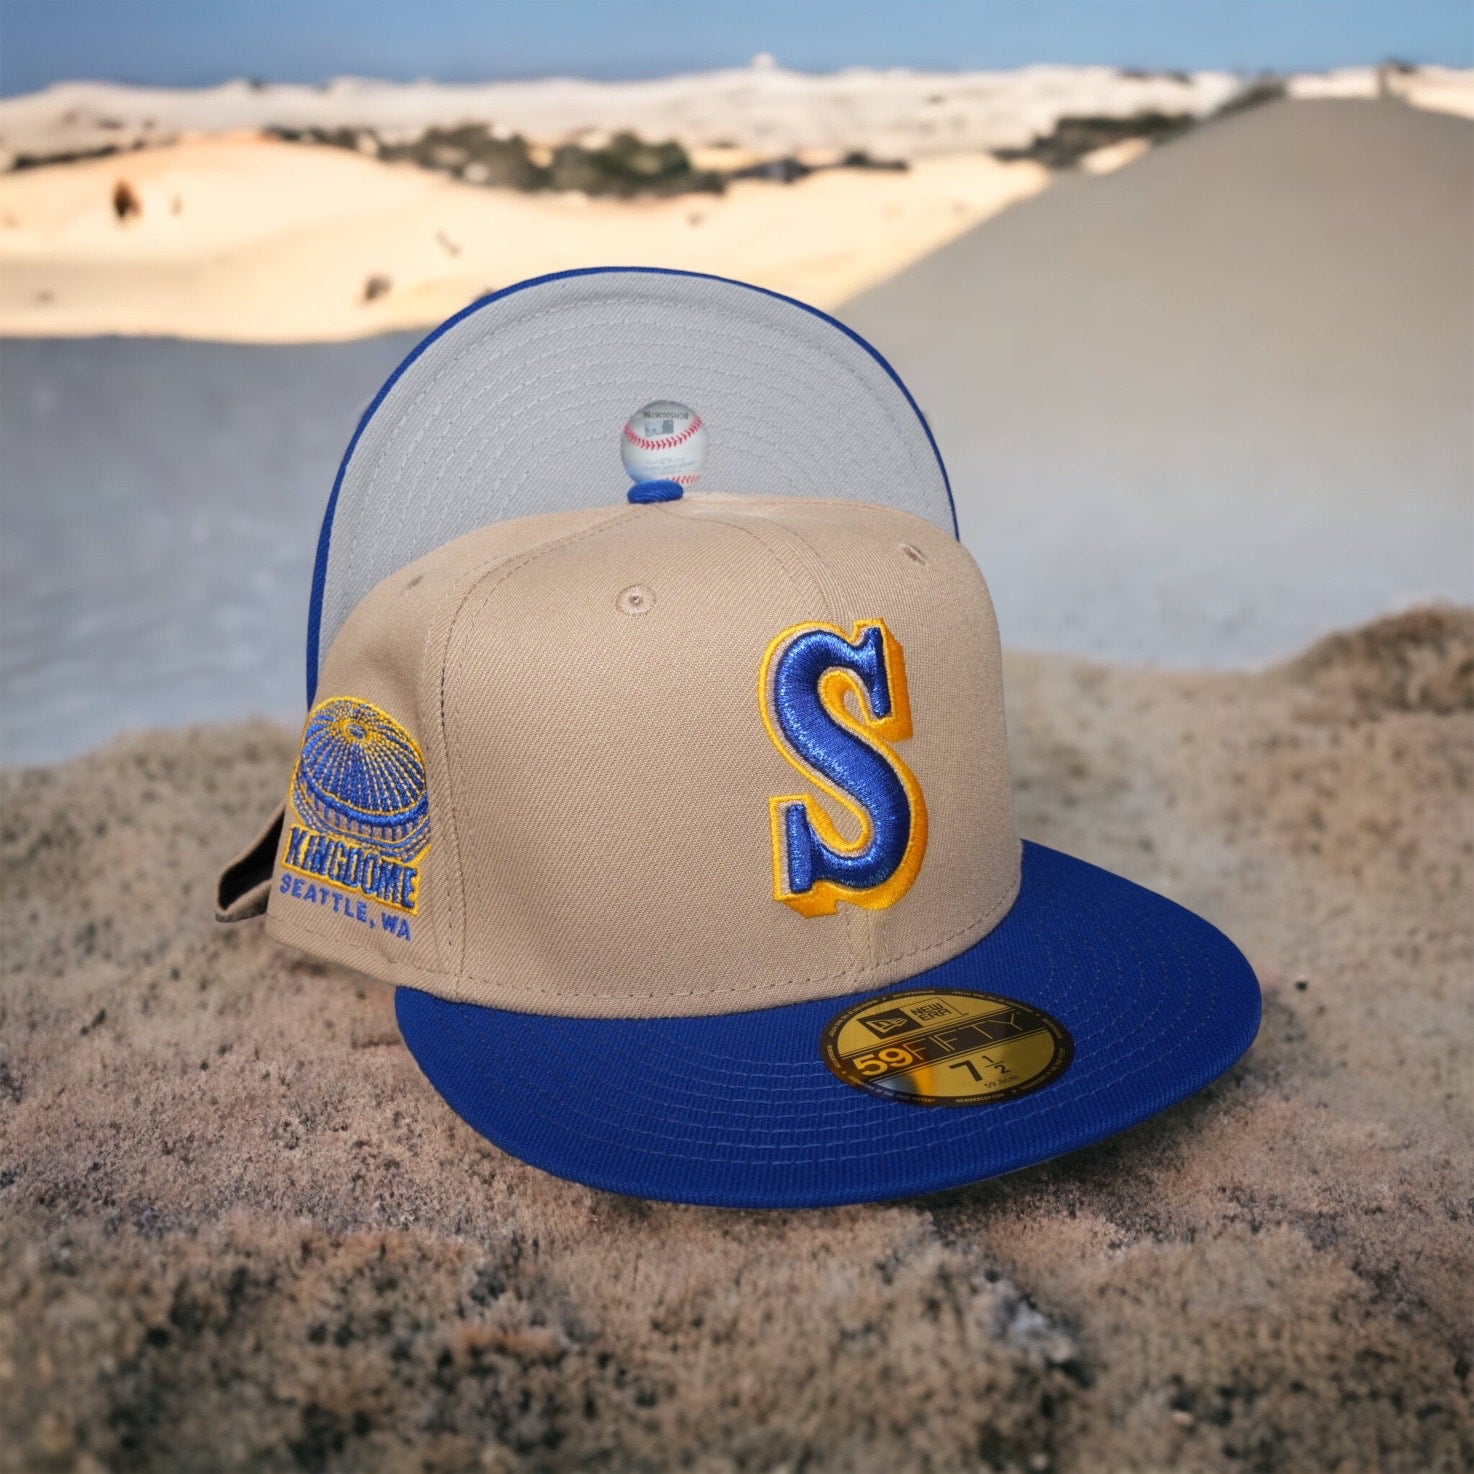 SEATTLE MARINERS BLUE WITH YELLOW SNAPBACK